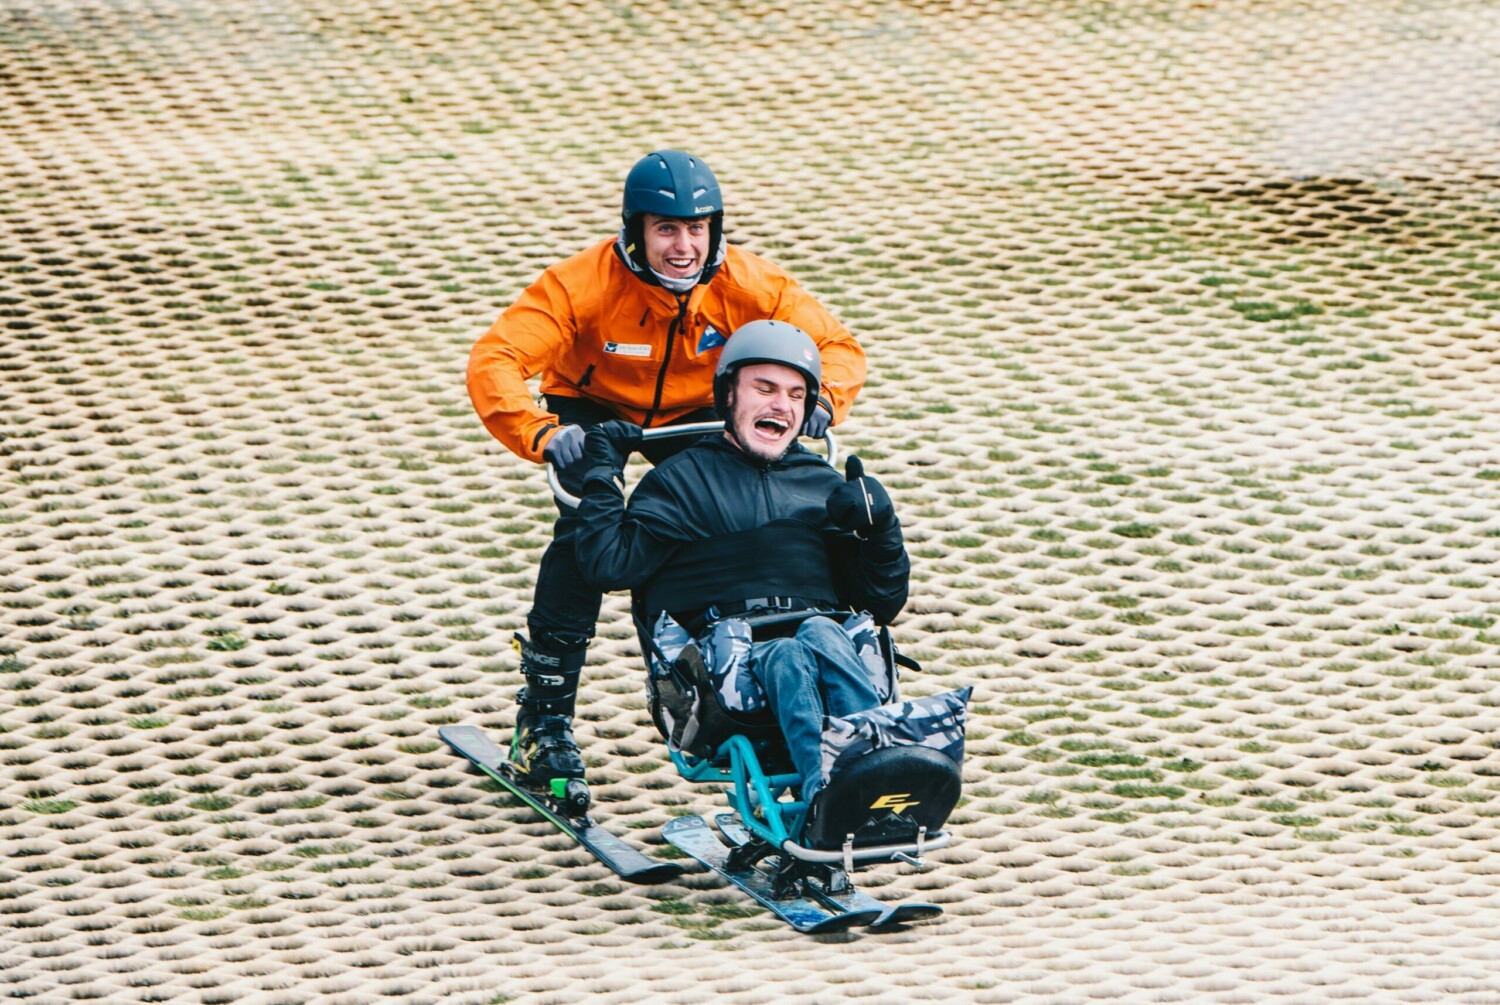 Person, in an orange ski jacket, on skis pushing another person, in a mobility ski, down a dry ski slope